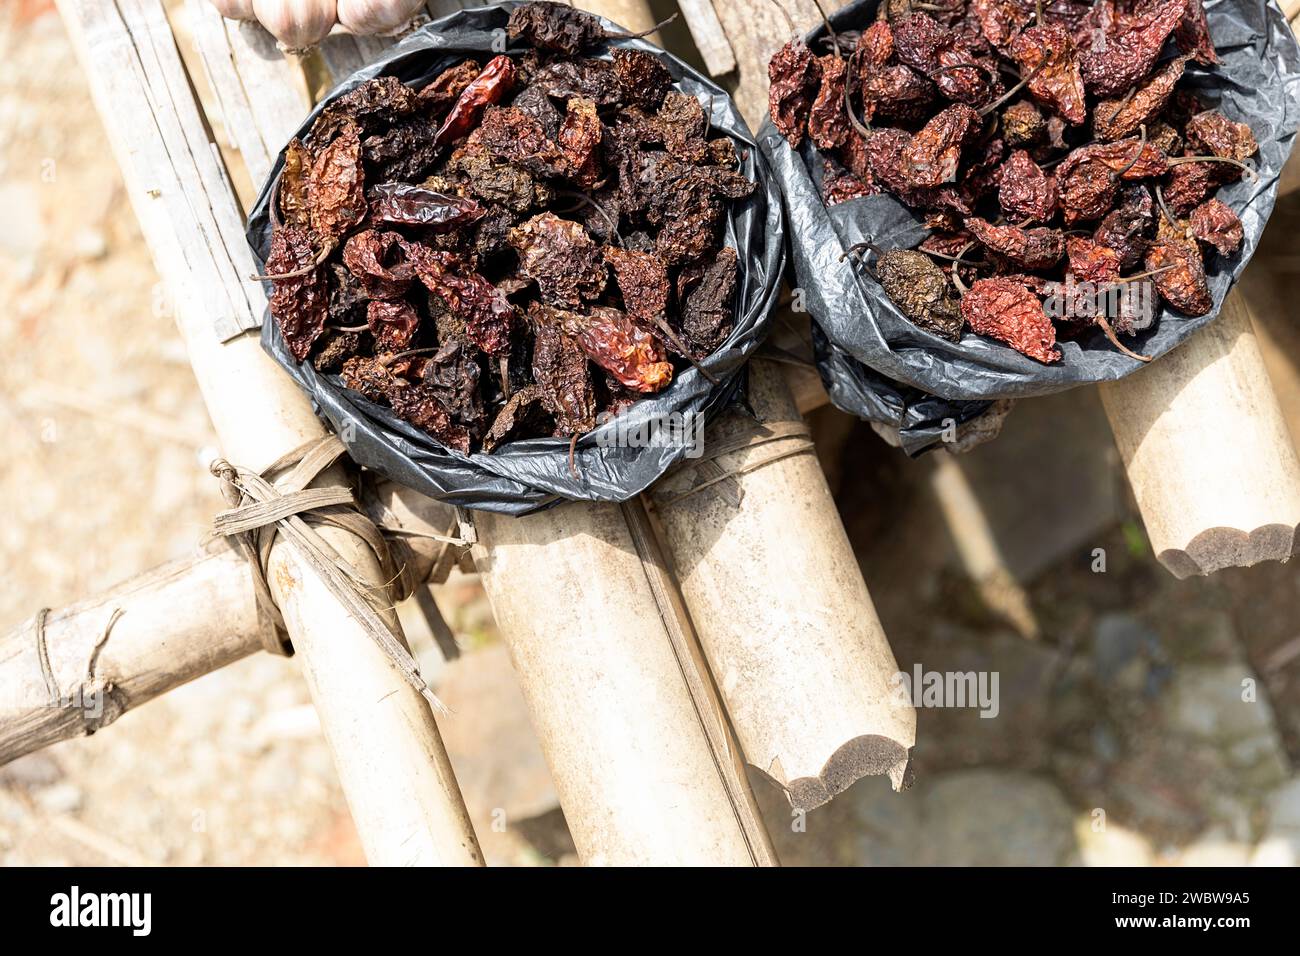 Naga Ghost Pepper Chilli Podson a stall, king chilly is among one of the hottest chili in the world. Nagaland, Northeast India Stock Photo